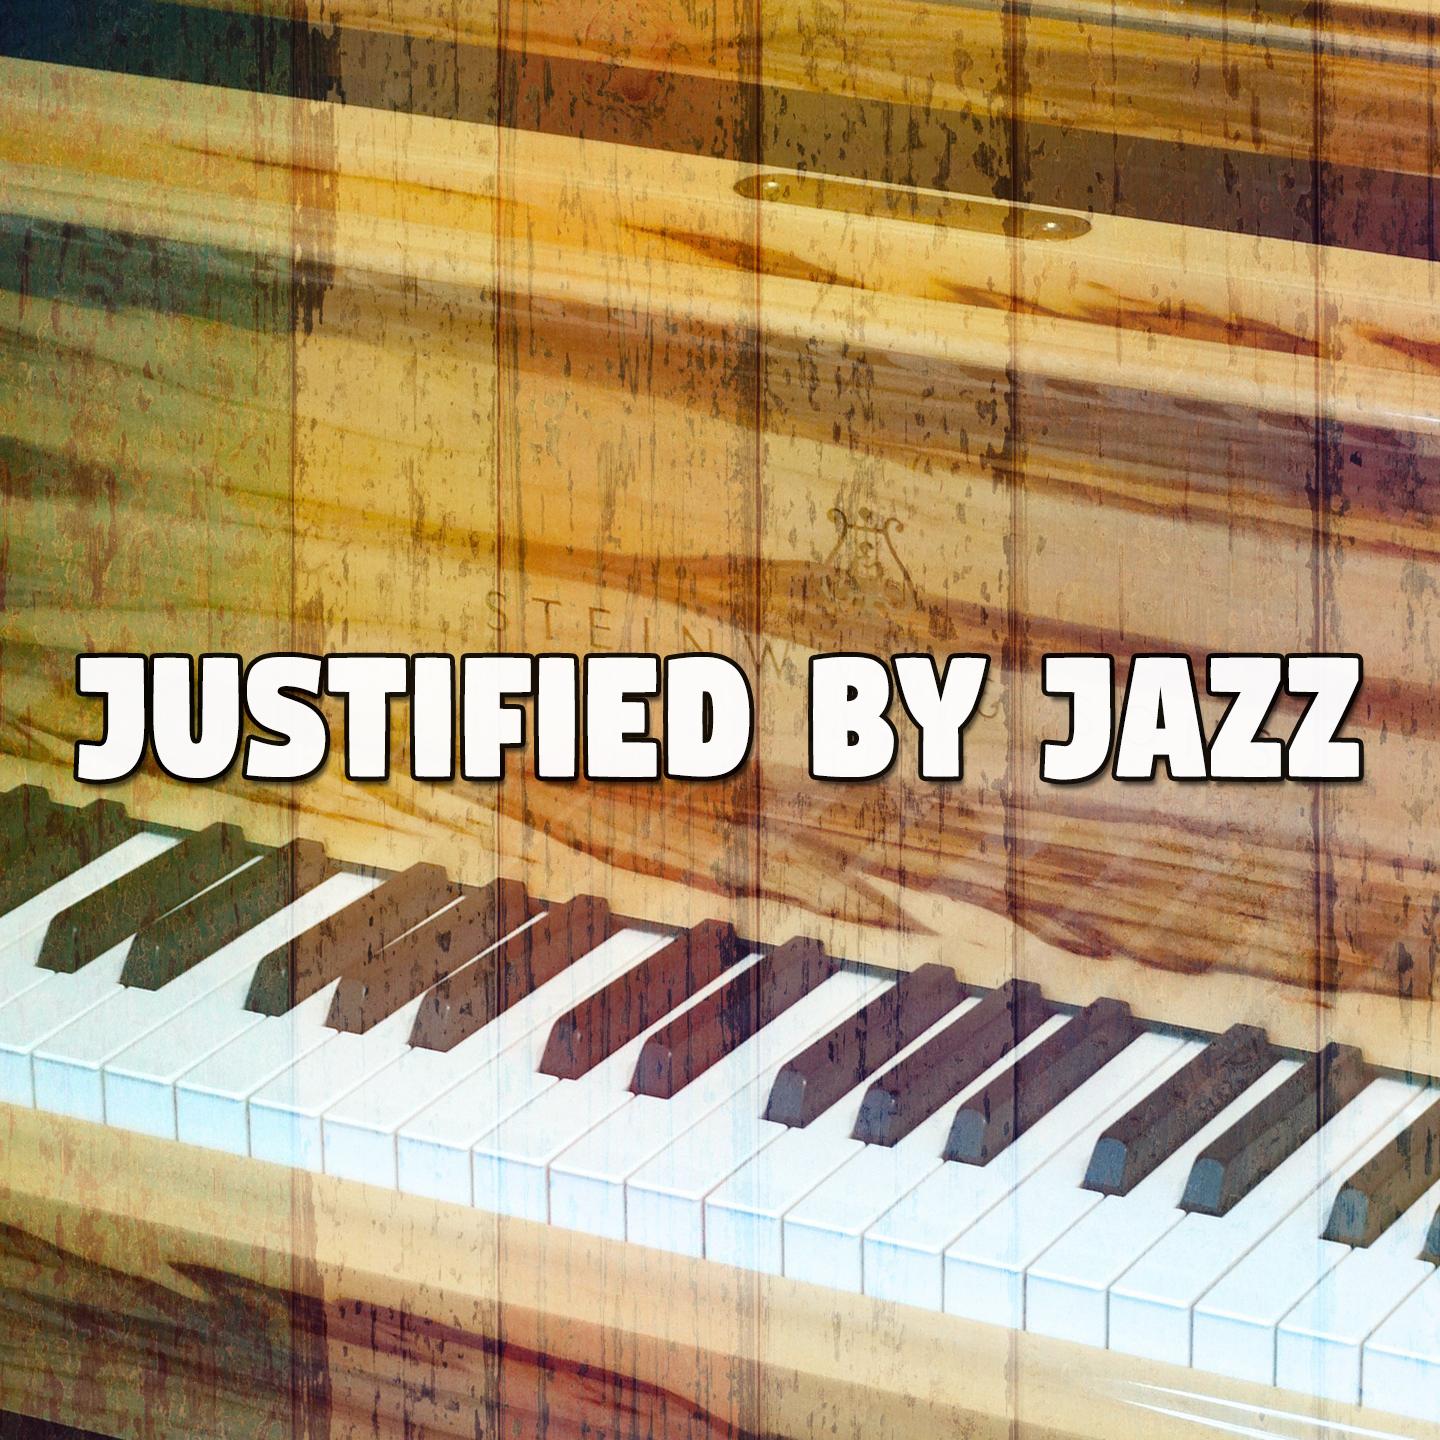 Justified by Jazz